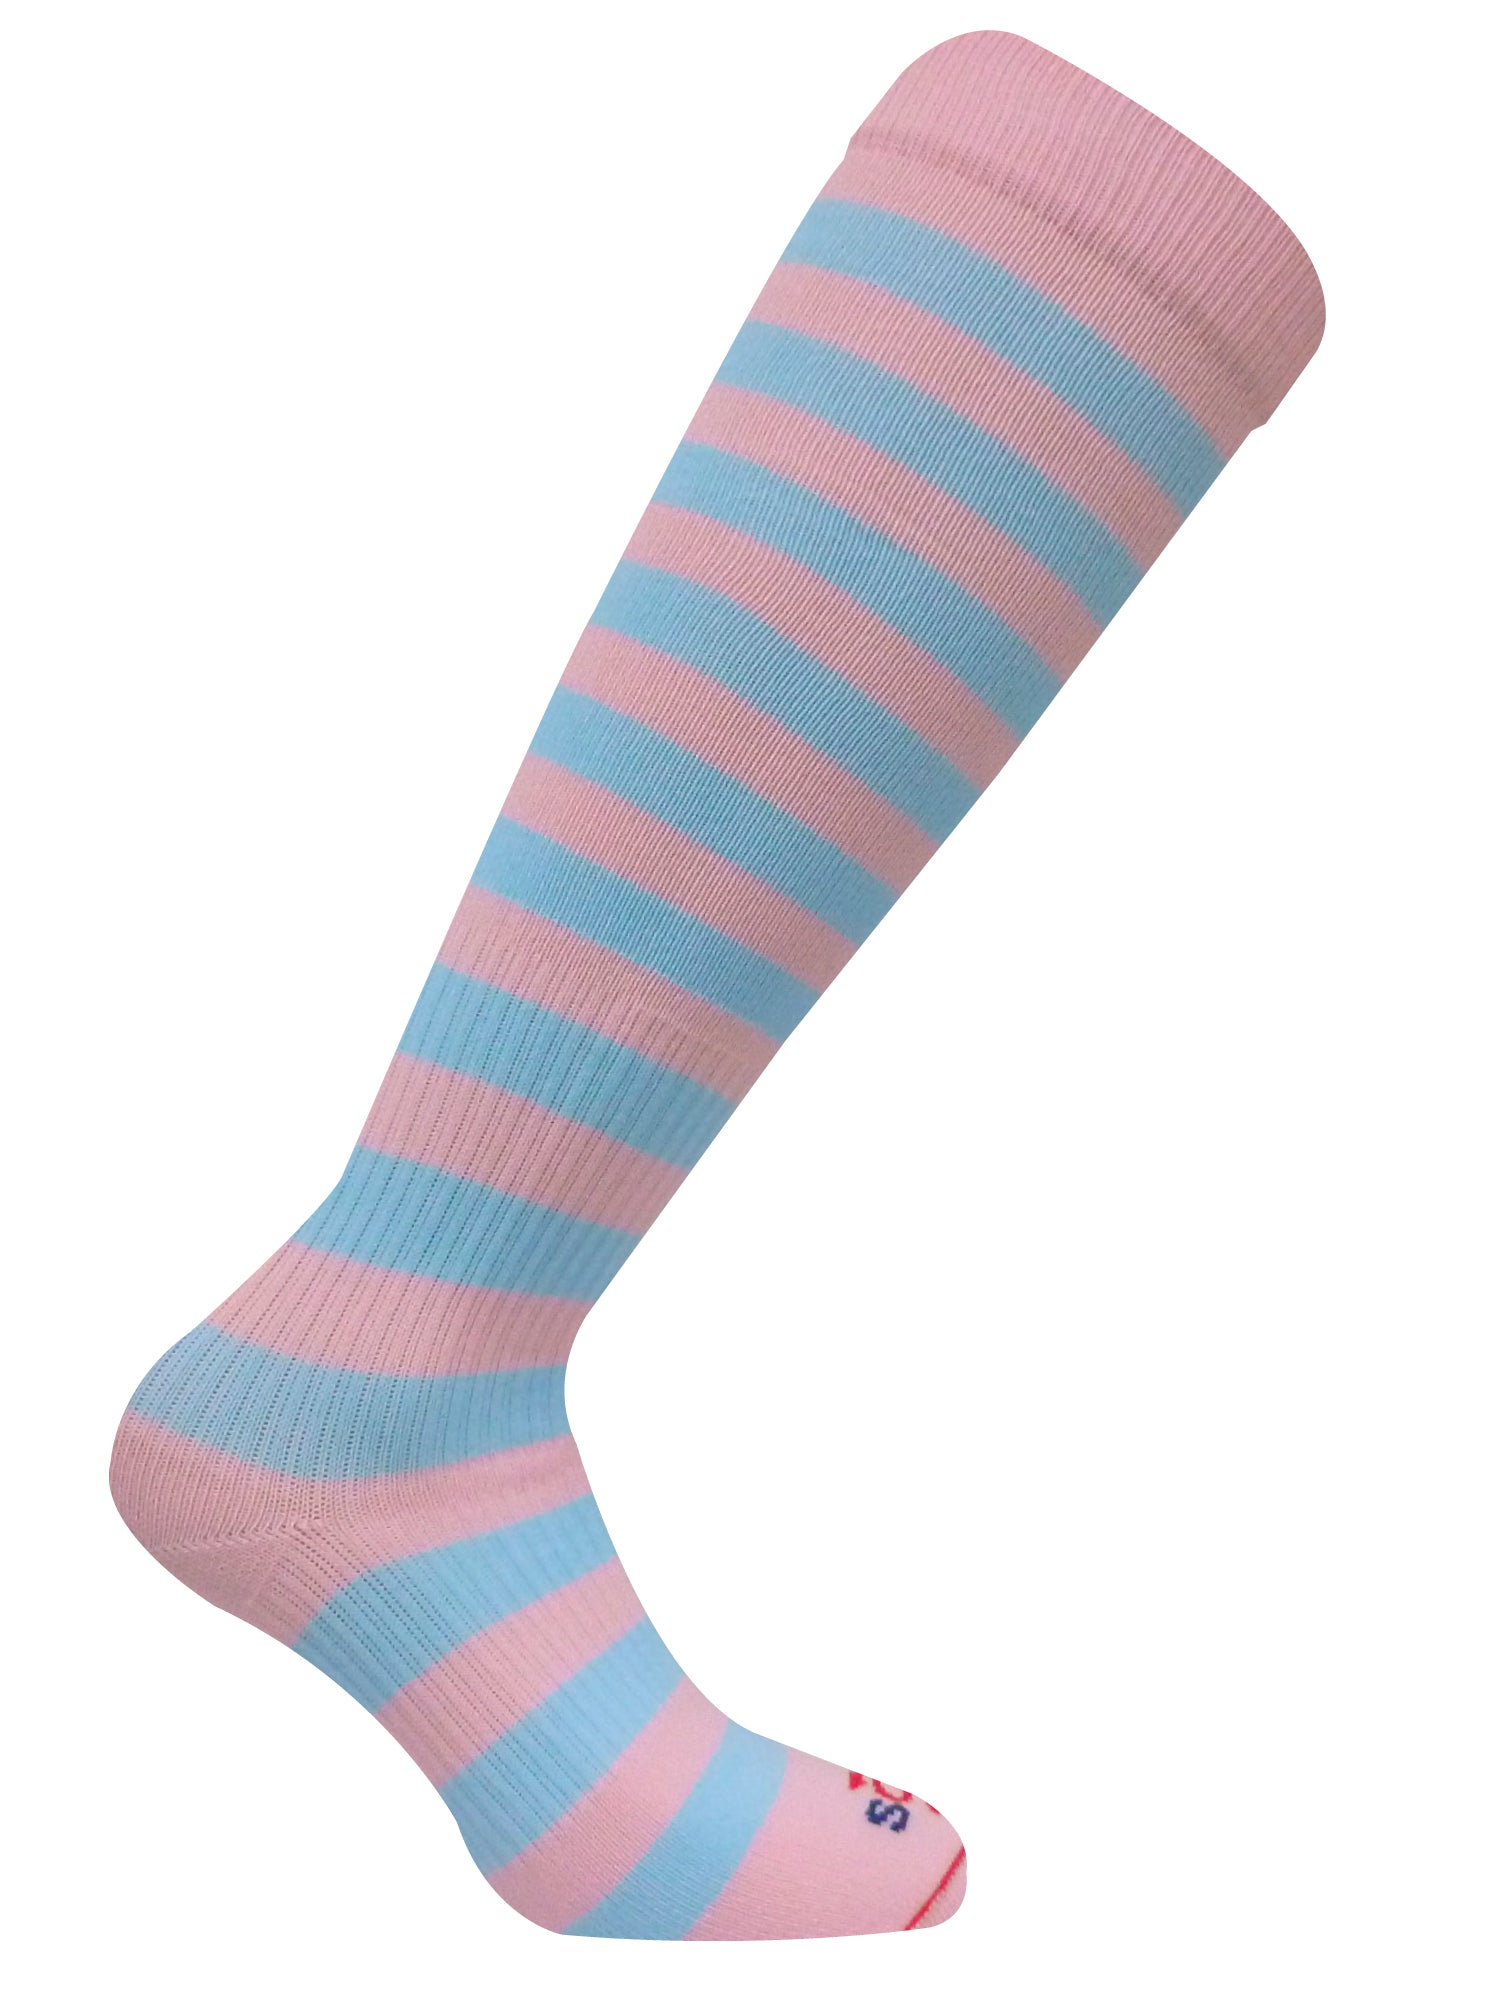 Women's Maternity Vein Care Light Compression Socks - CSN7011 -  Pink and Blue Striped